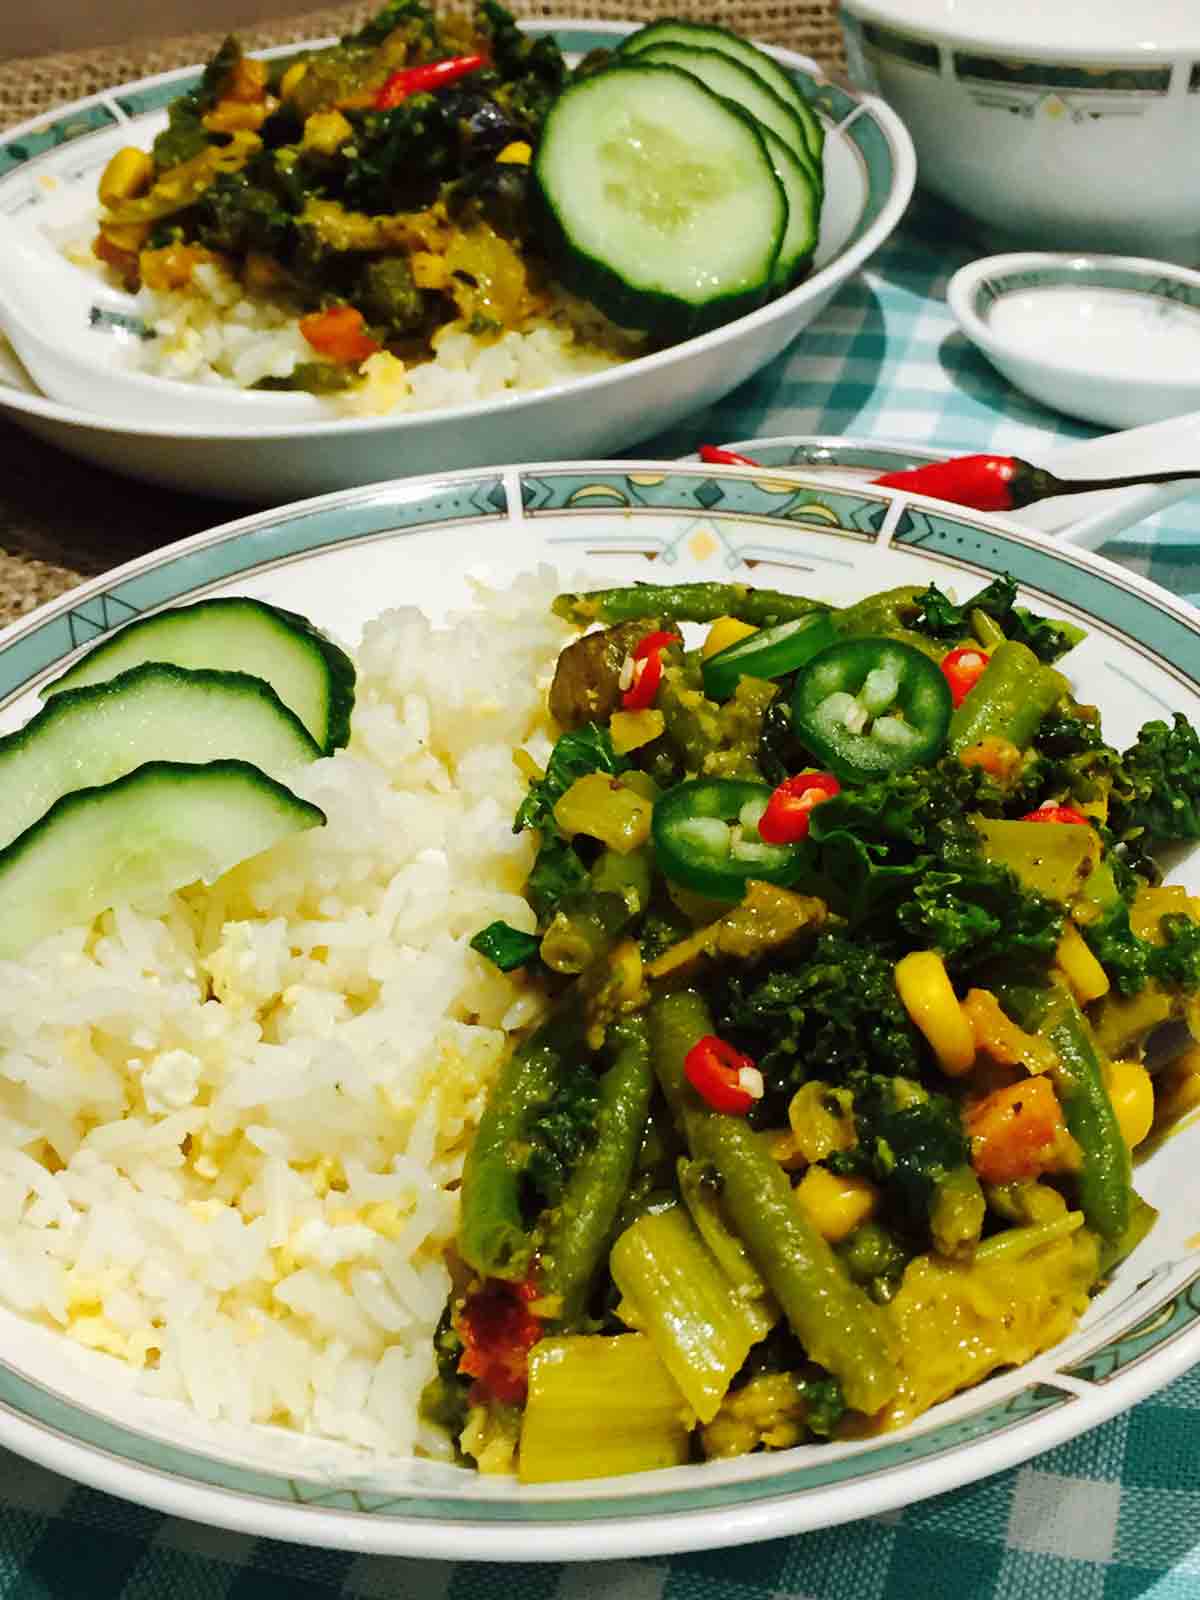 A white plate of scrumptious vegetarian Thai curry, together with egg-fried rice and other veggies.